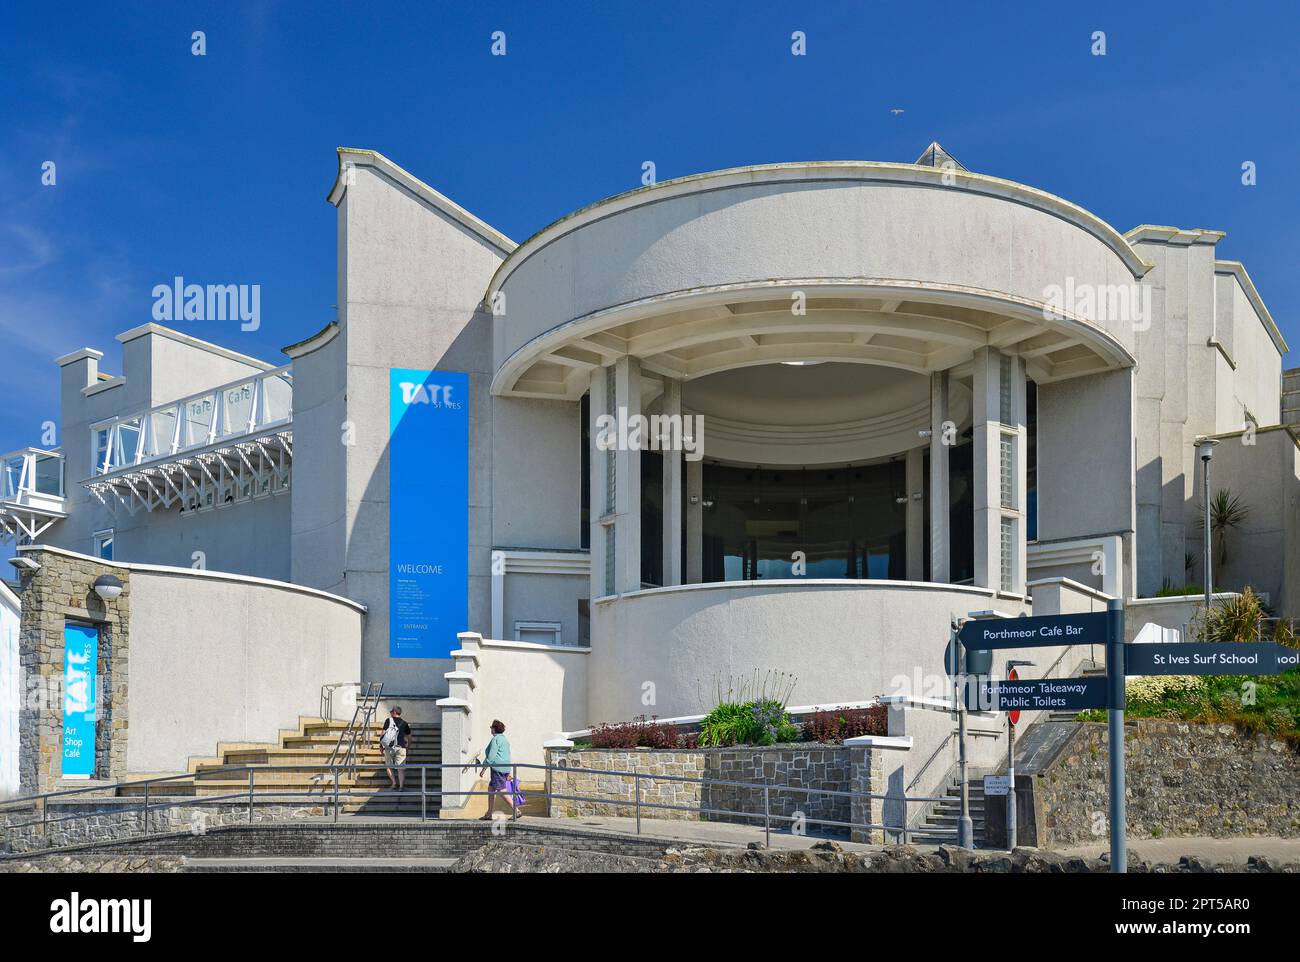 Galerie d'art Tate St Ives, Porthmeor Beach, St Ives, Cornwall, Angleterre, Royaume-Uni Banque D'Images